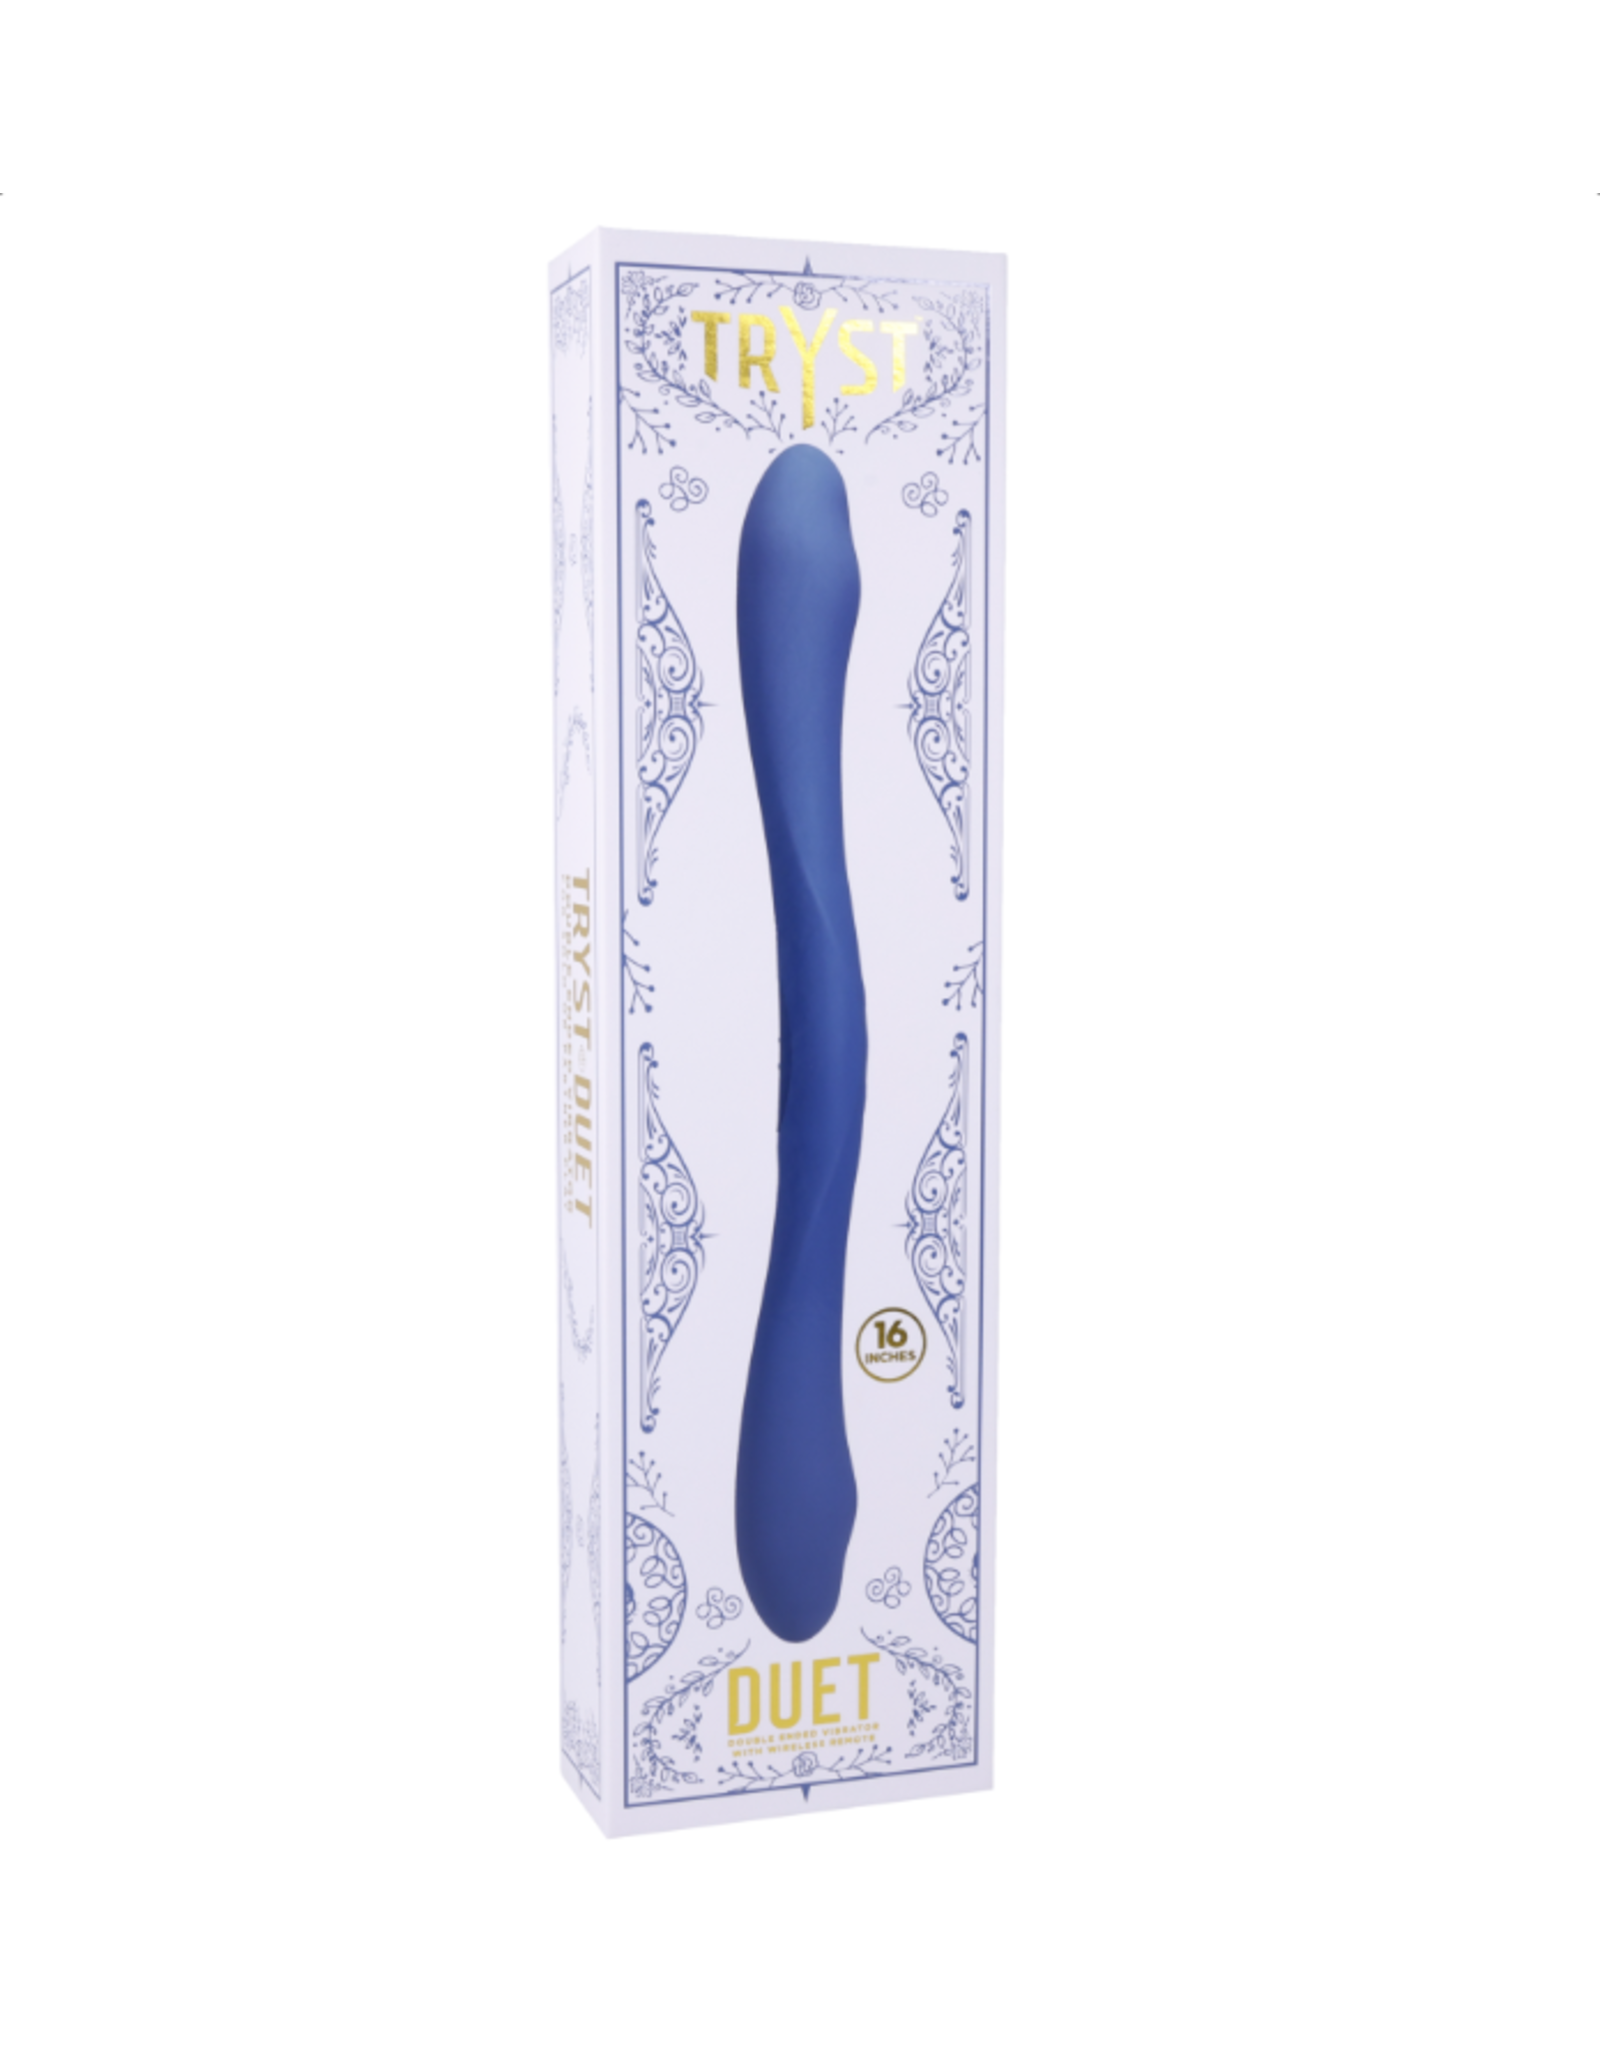 Doc Johnson Tryst- Duet Double Ended Vibe - Periwinkle